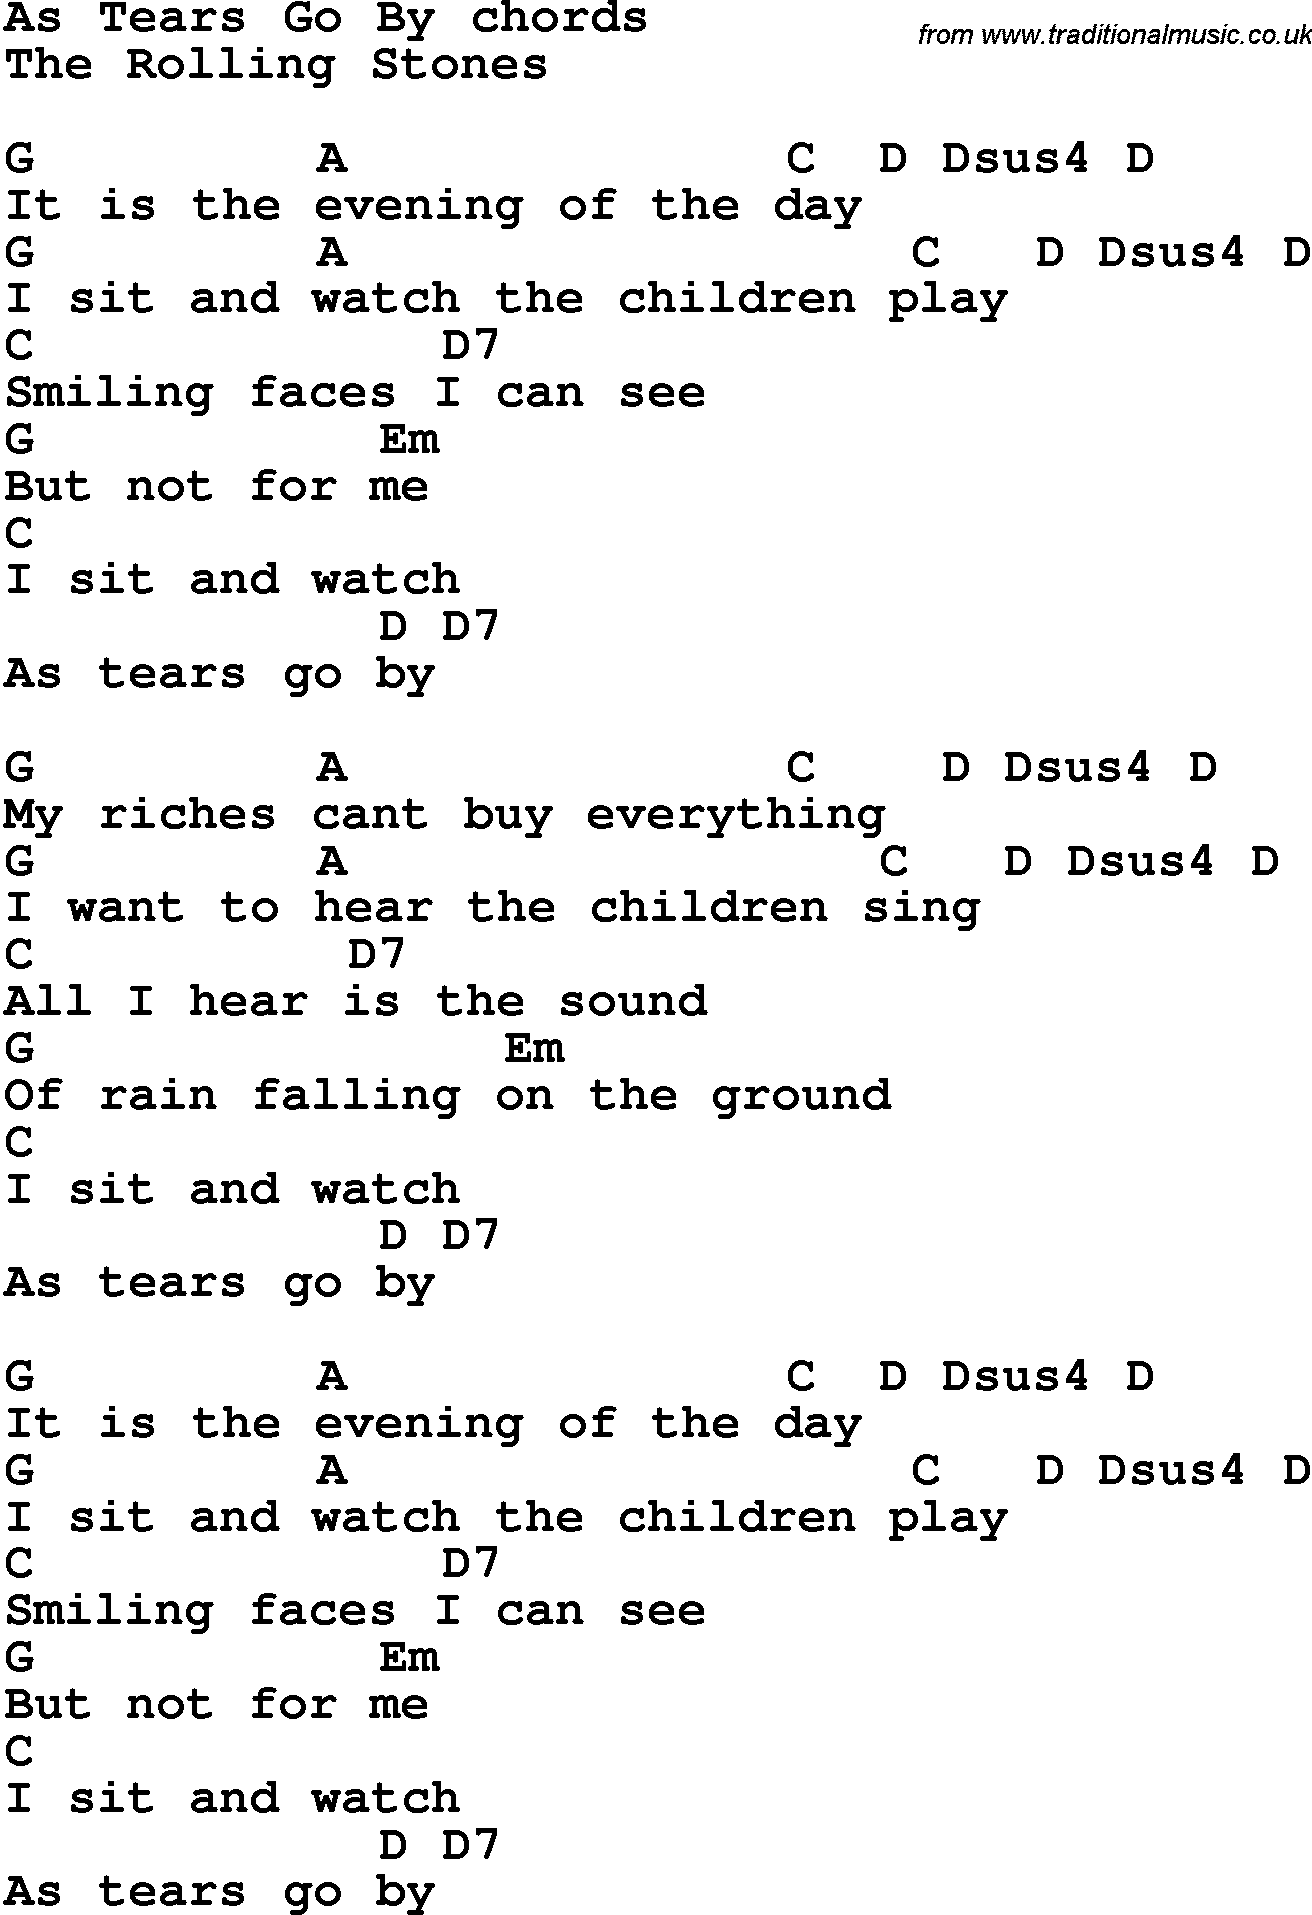 Song lyrics with guitar chords for As Tears Go By - The Rolling Stones